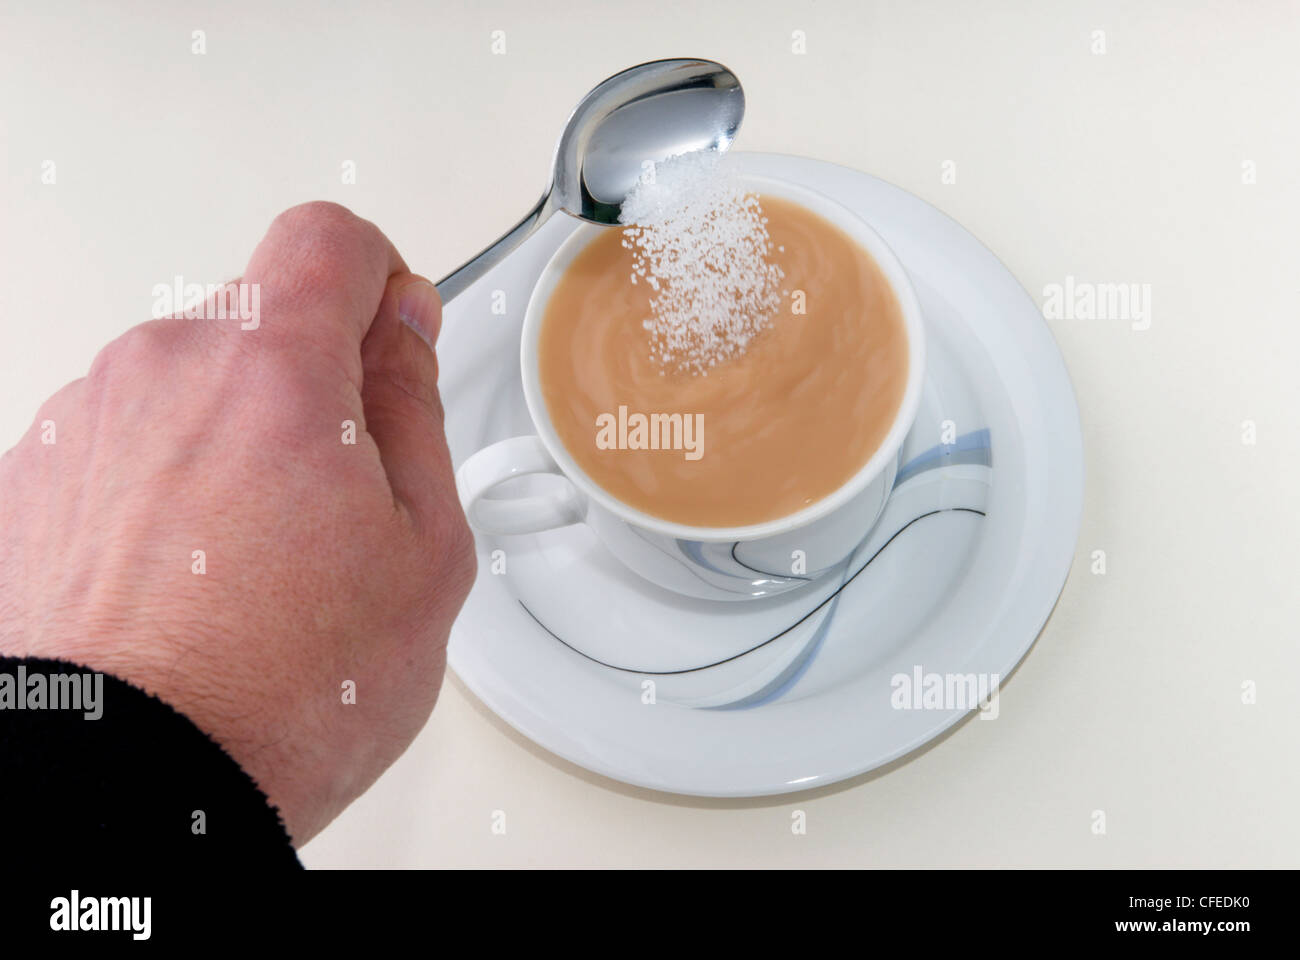 Time for tea.  A nice cup of tea ready and waiting to refresh it just needs a bit of sugar to sweeten. Stock Photo